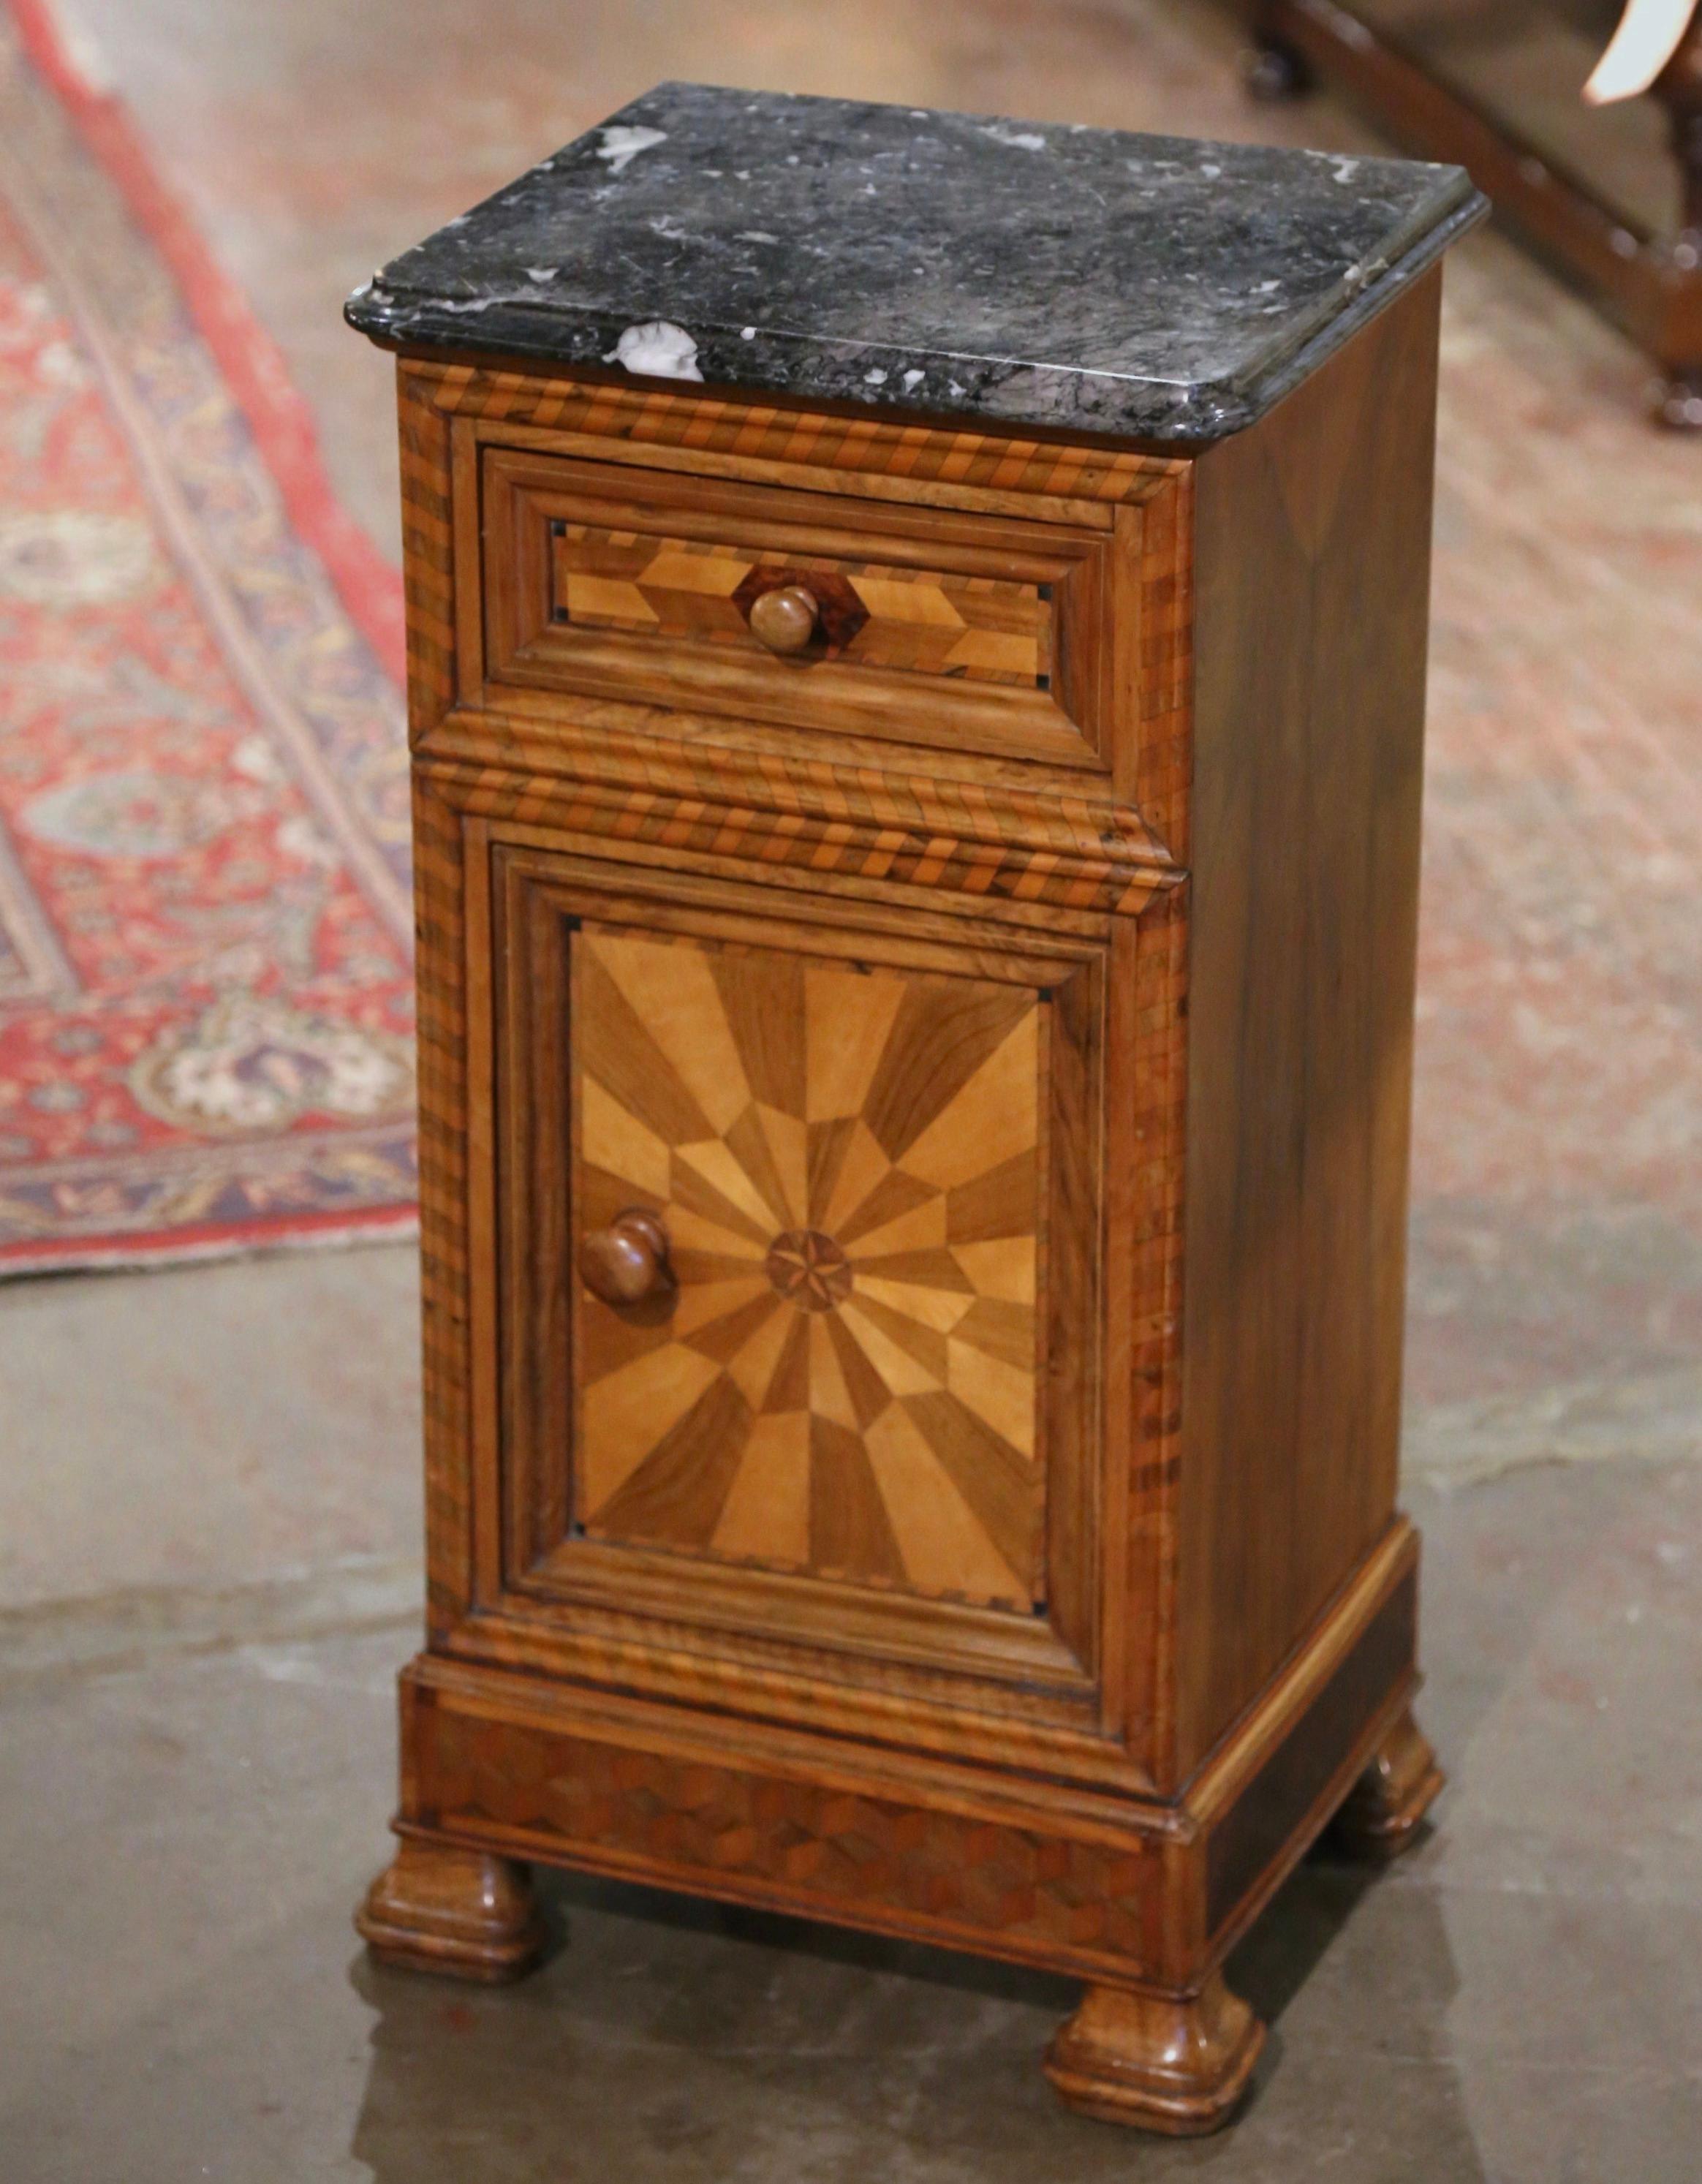 This elegant antique nightstand was crafted in France, circa 1880. The traditional fruit wood cabinet sits on bracket feet over a wide bottom plinth; it is fitted with a single drawer dressed with a wooden knob, over a front door also dressed with a